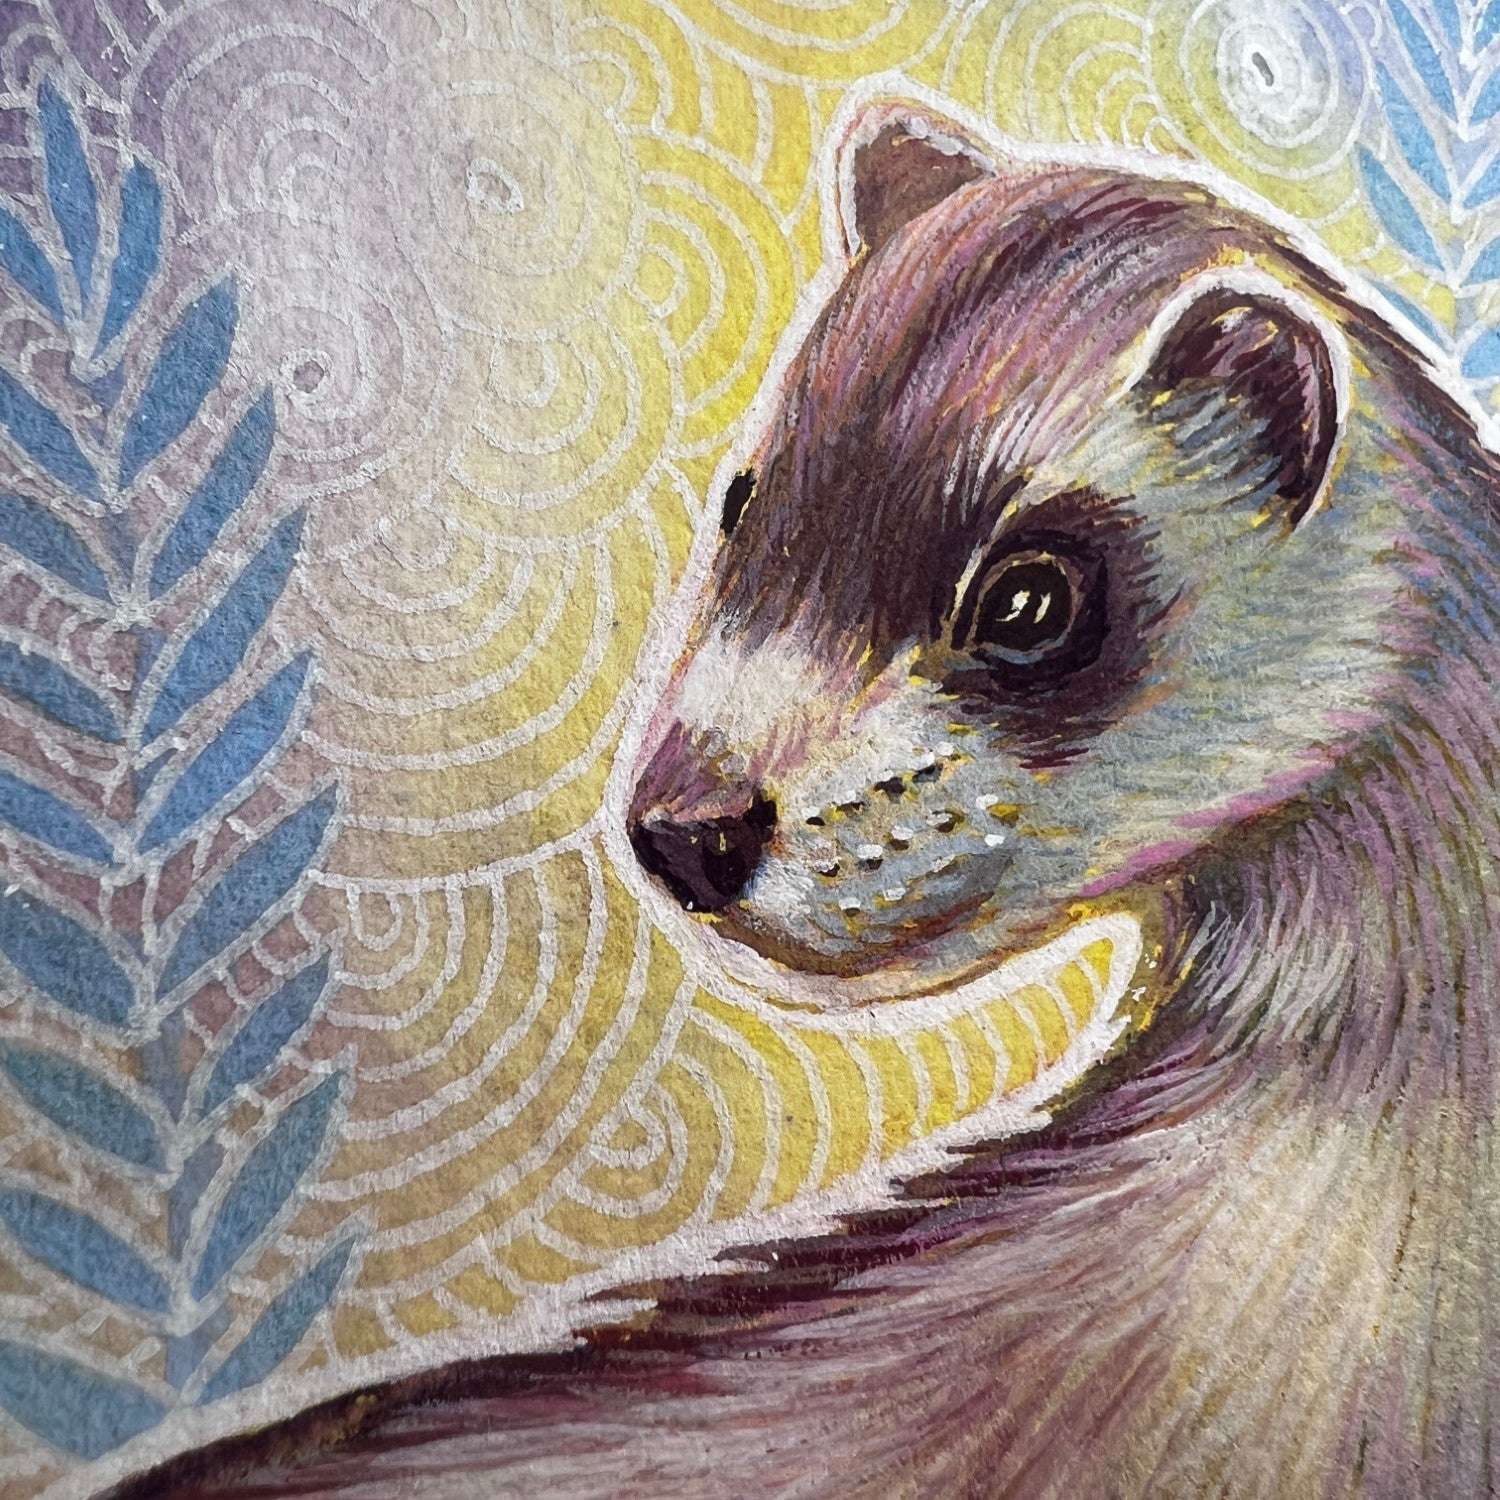 The Ferret - Original Artwork of a ferret with detailed, swirling patterns in the background. The artwork emphasizes the creature's detailed fur texture and expressive eyes.